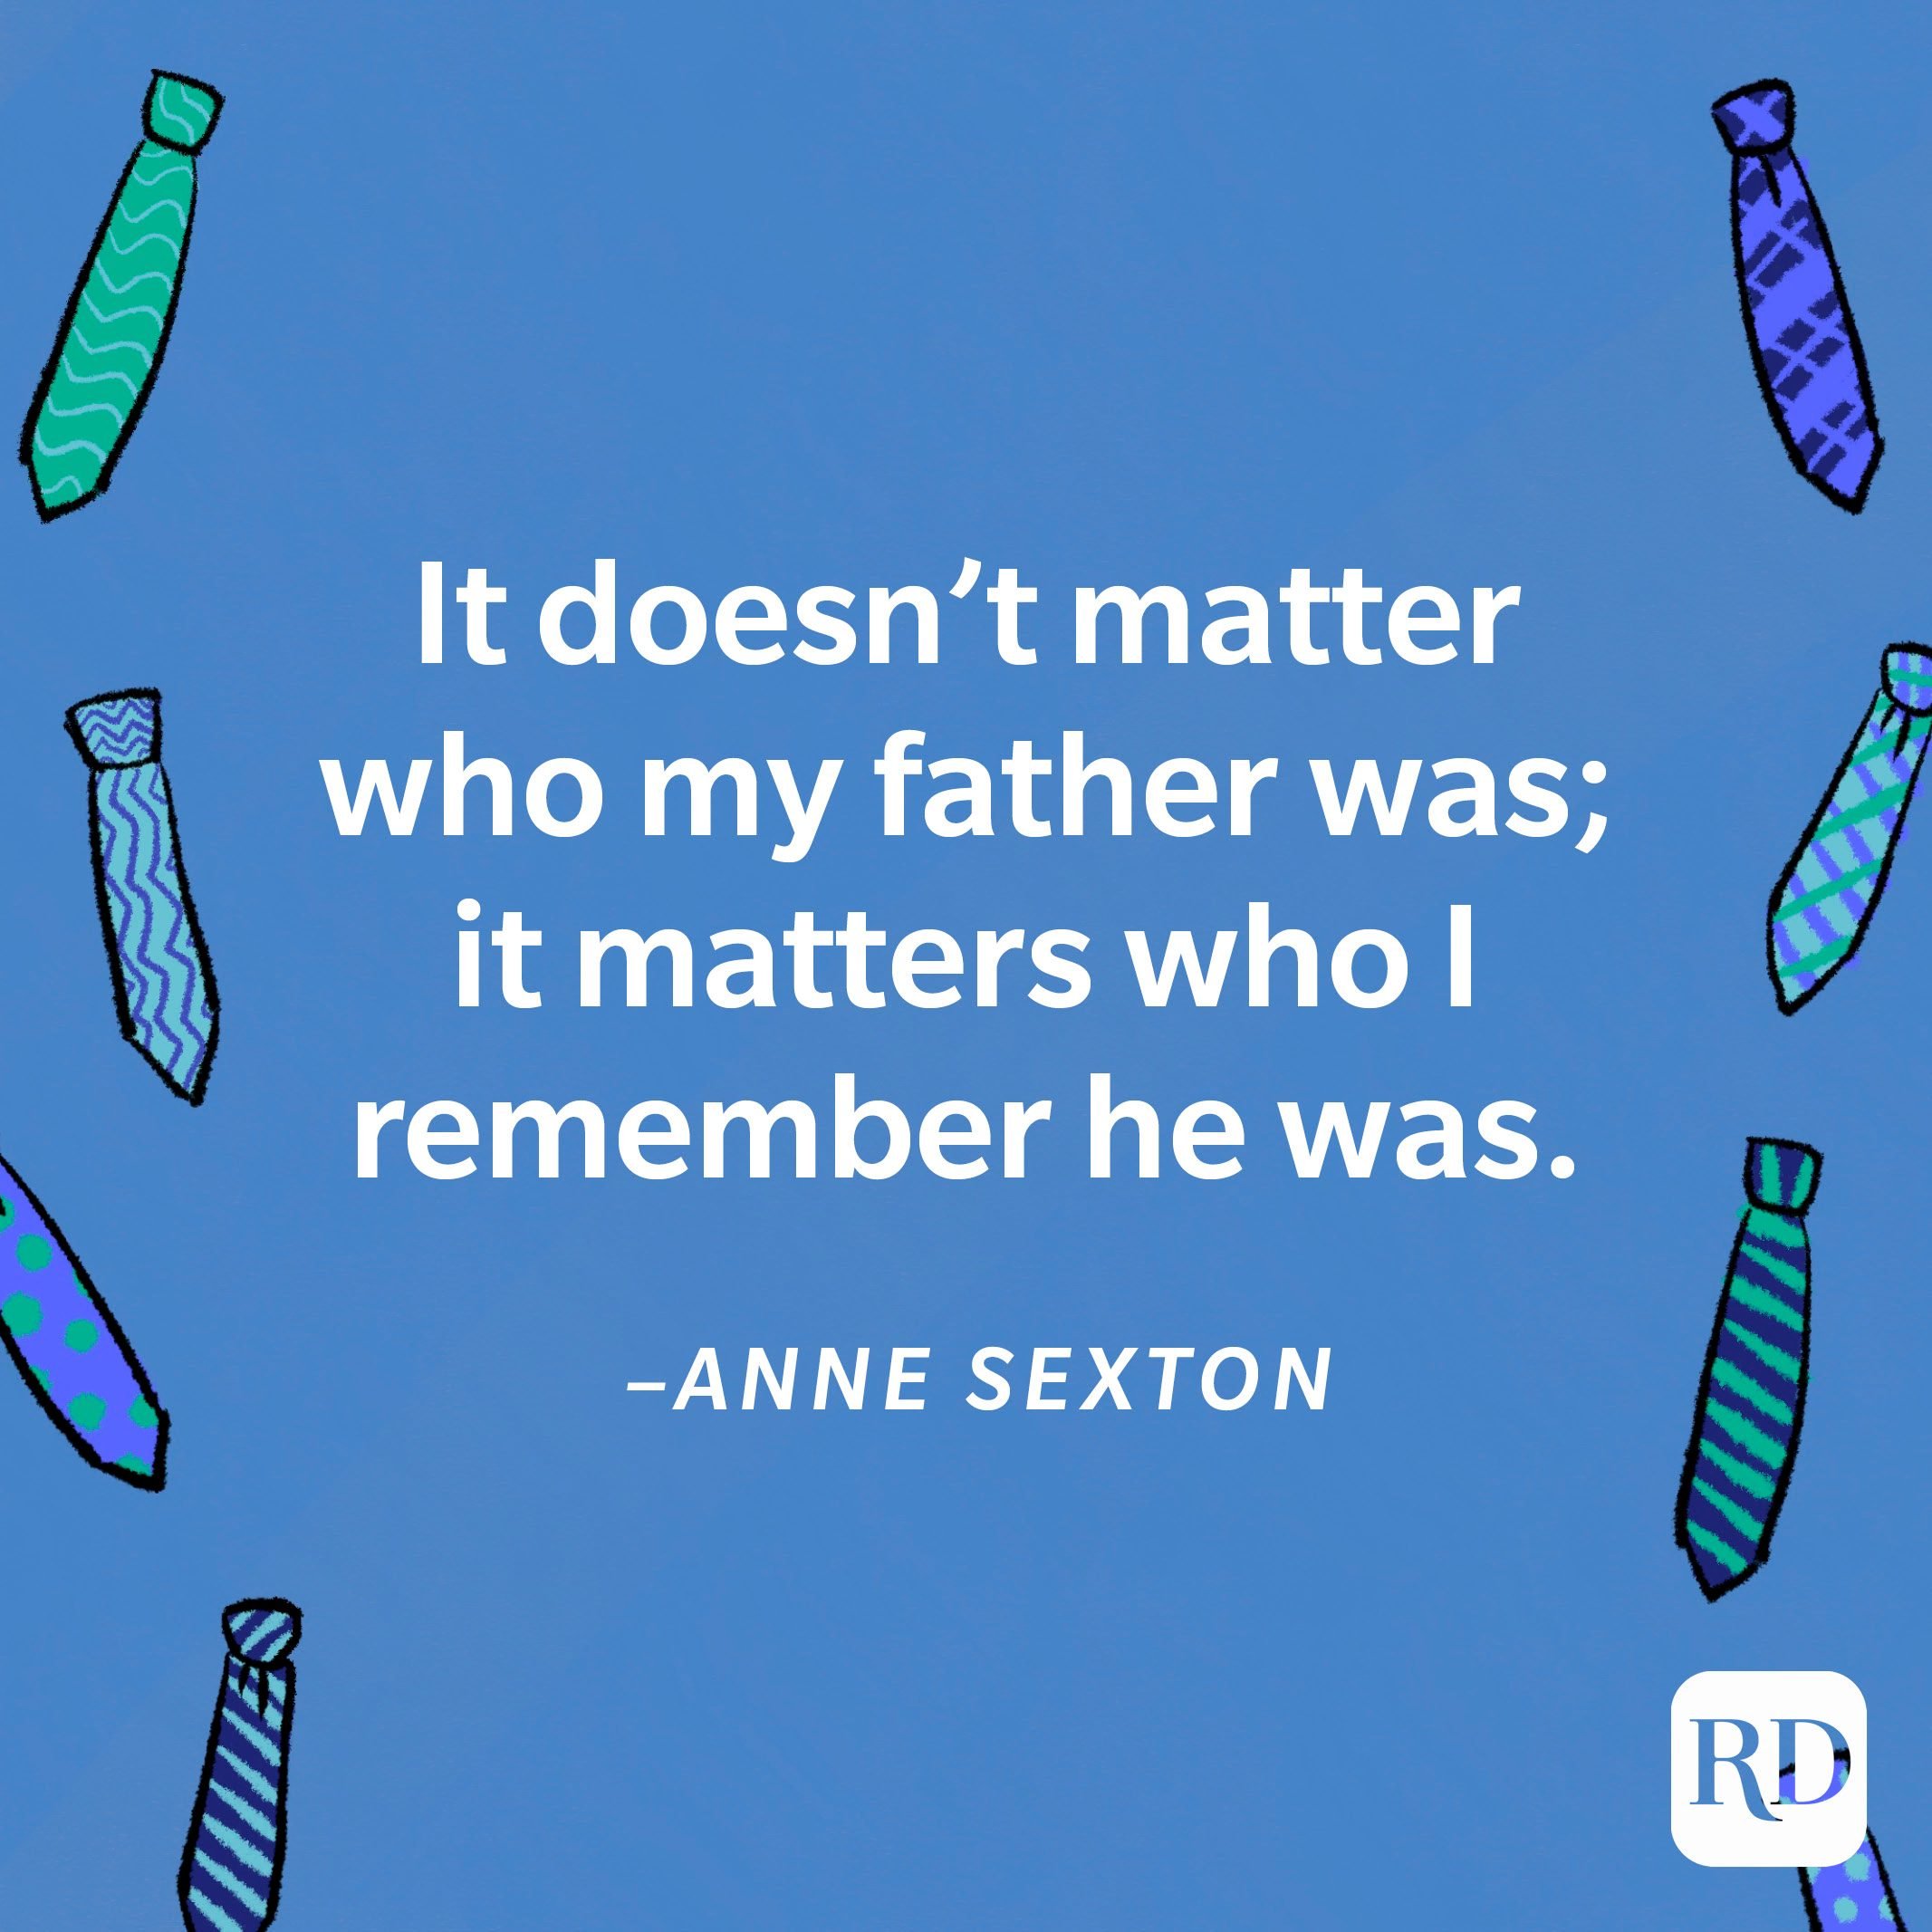 “It doesn’t matter who my father was; it matters who I remember he was.”—Anne Sexton